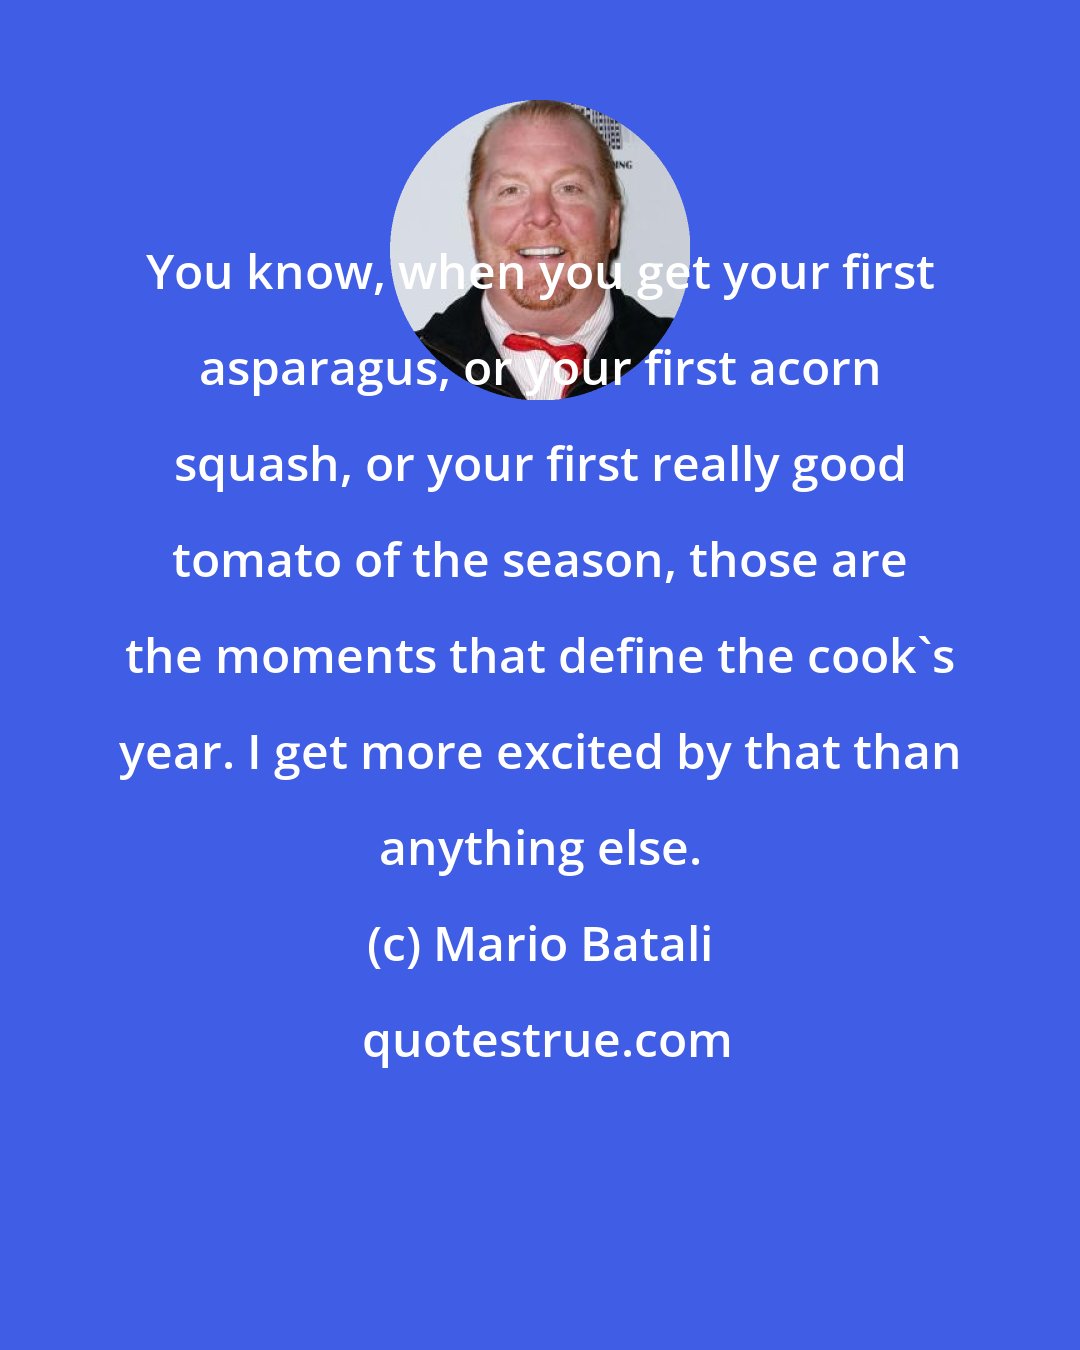 Mario Batali: You know, when you get your first asparagus, or your first acorn squash, or your first really good tomato of the season, those are the moments that define the cook's year. I get more excited by that than anything else.